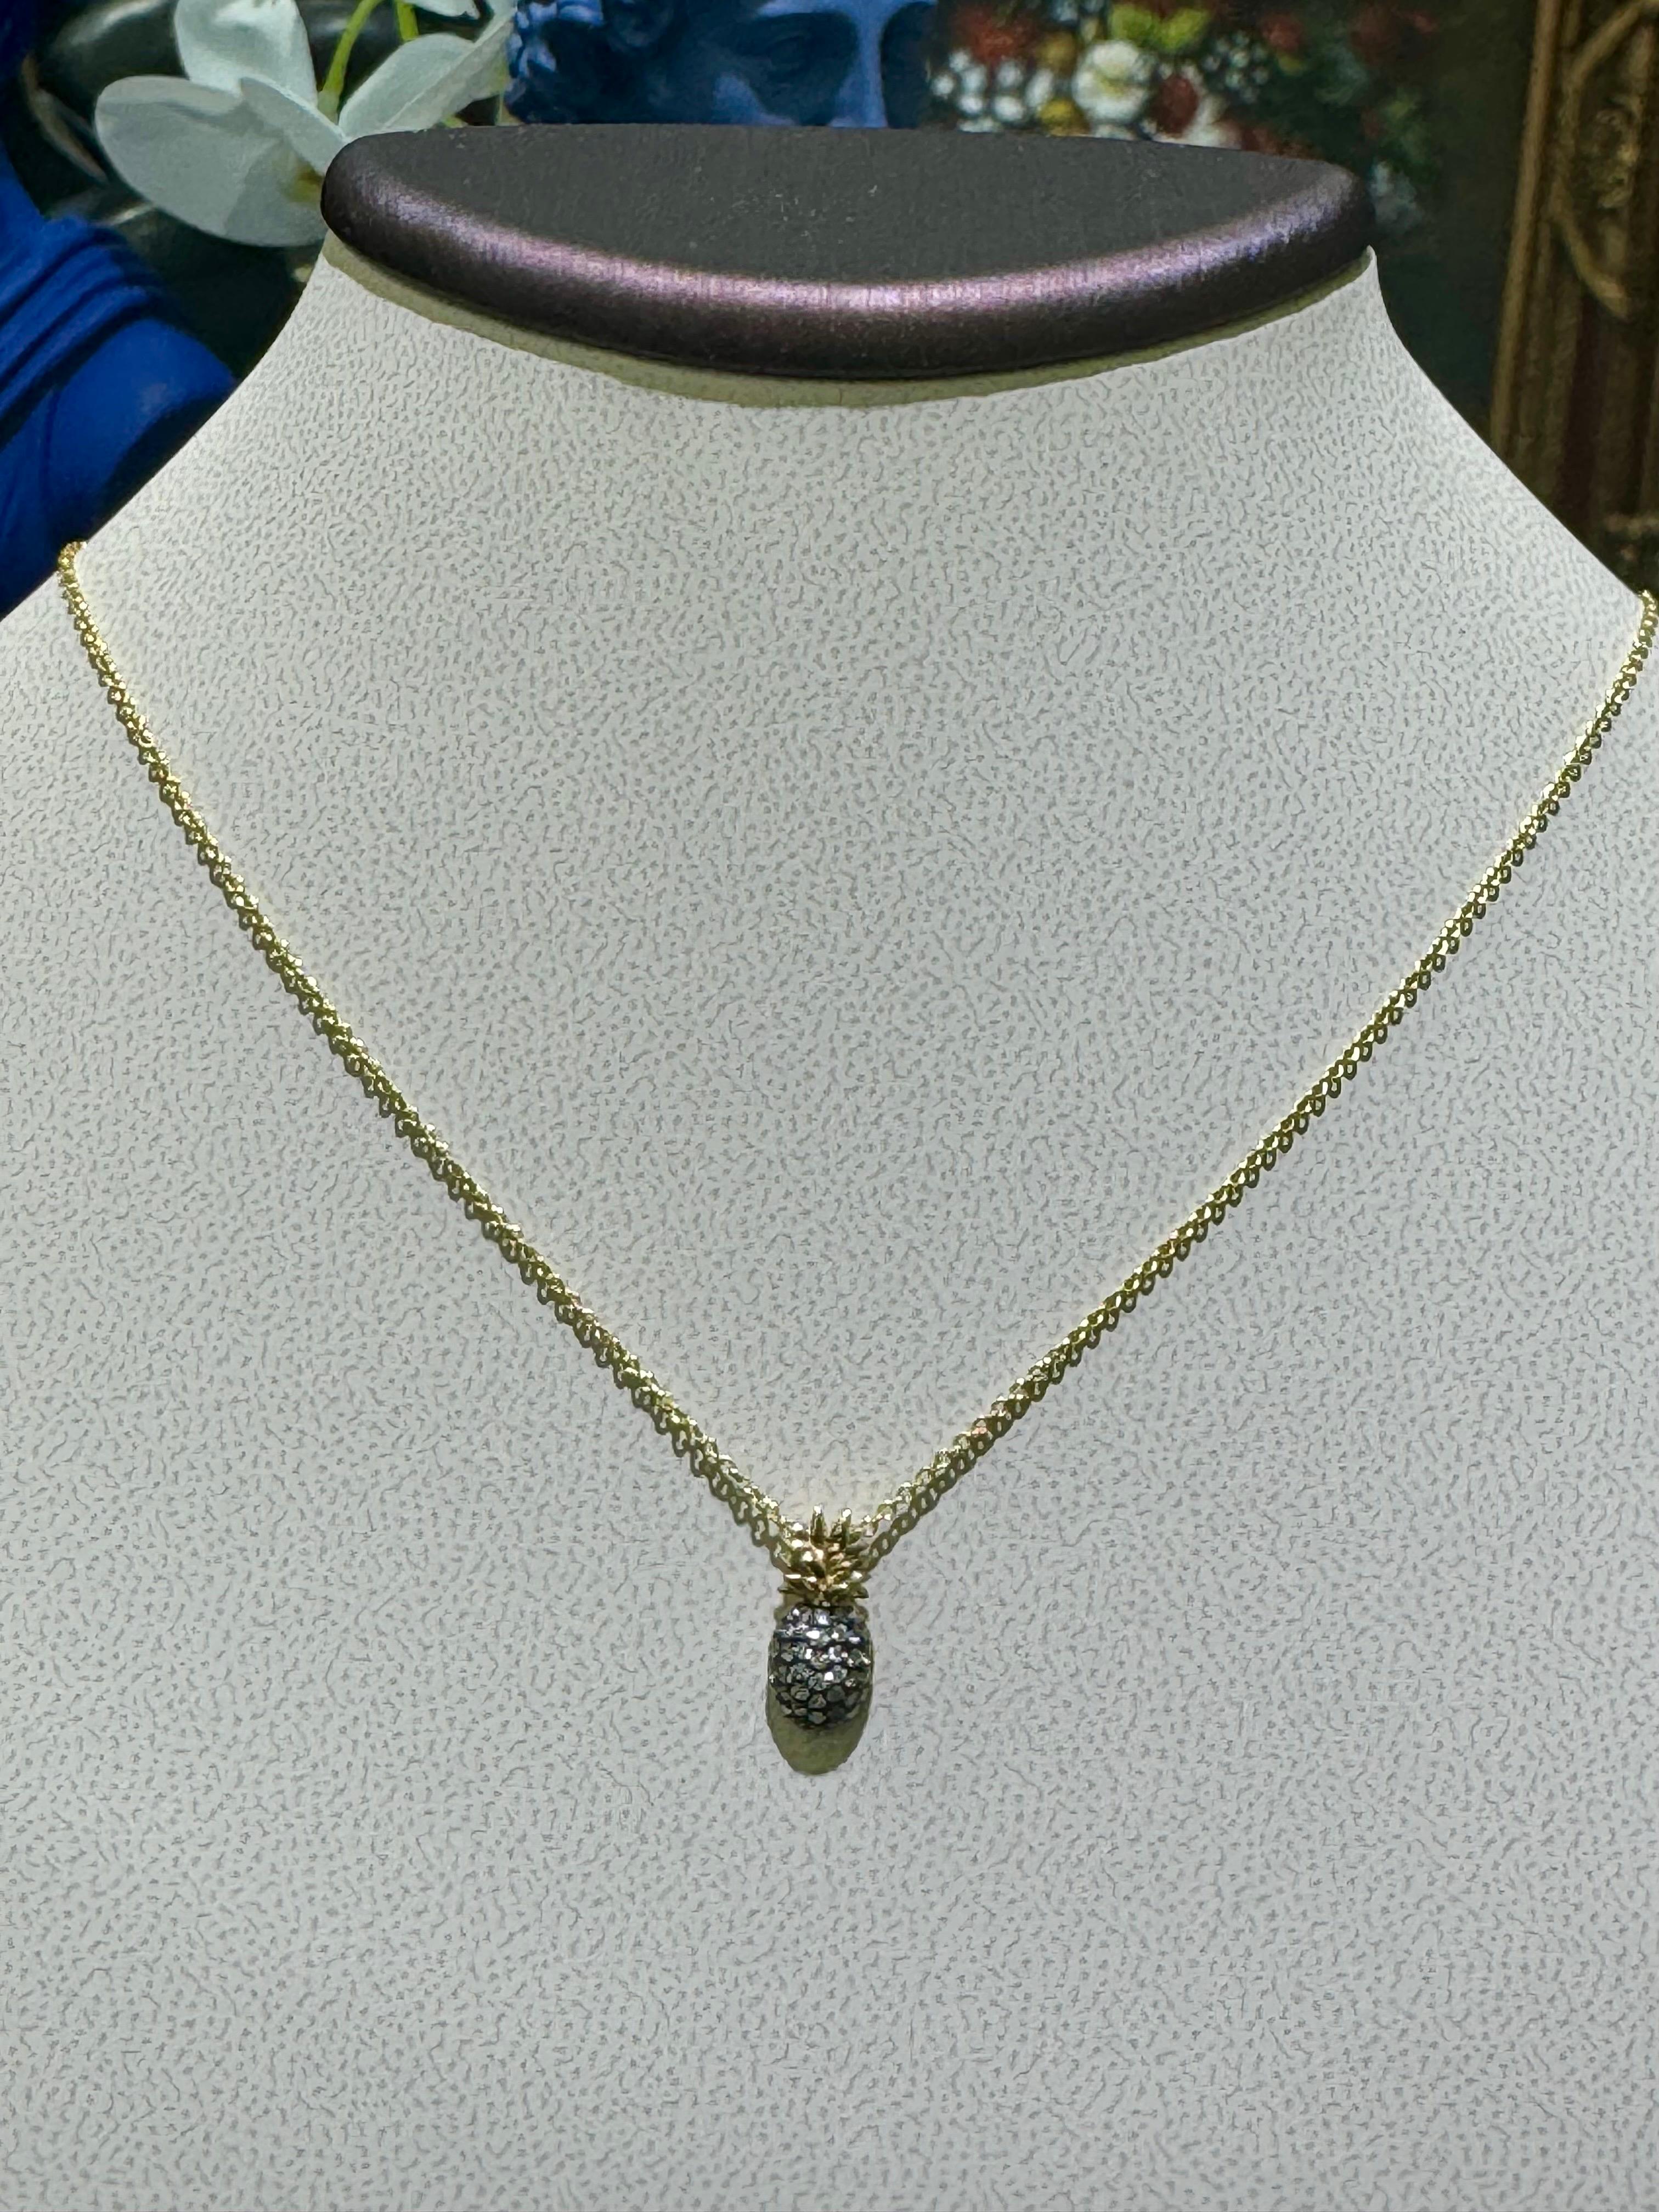 Cute Effy Pineapple Necklace With Diamonds In 14k.

0.29 carats in brown round cut diamonds,

Length is adjustable 16” or 18”